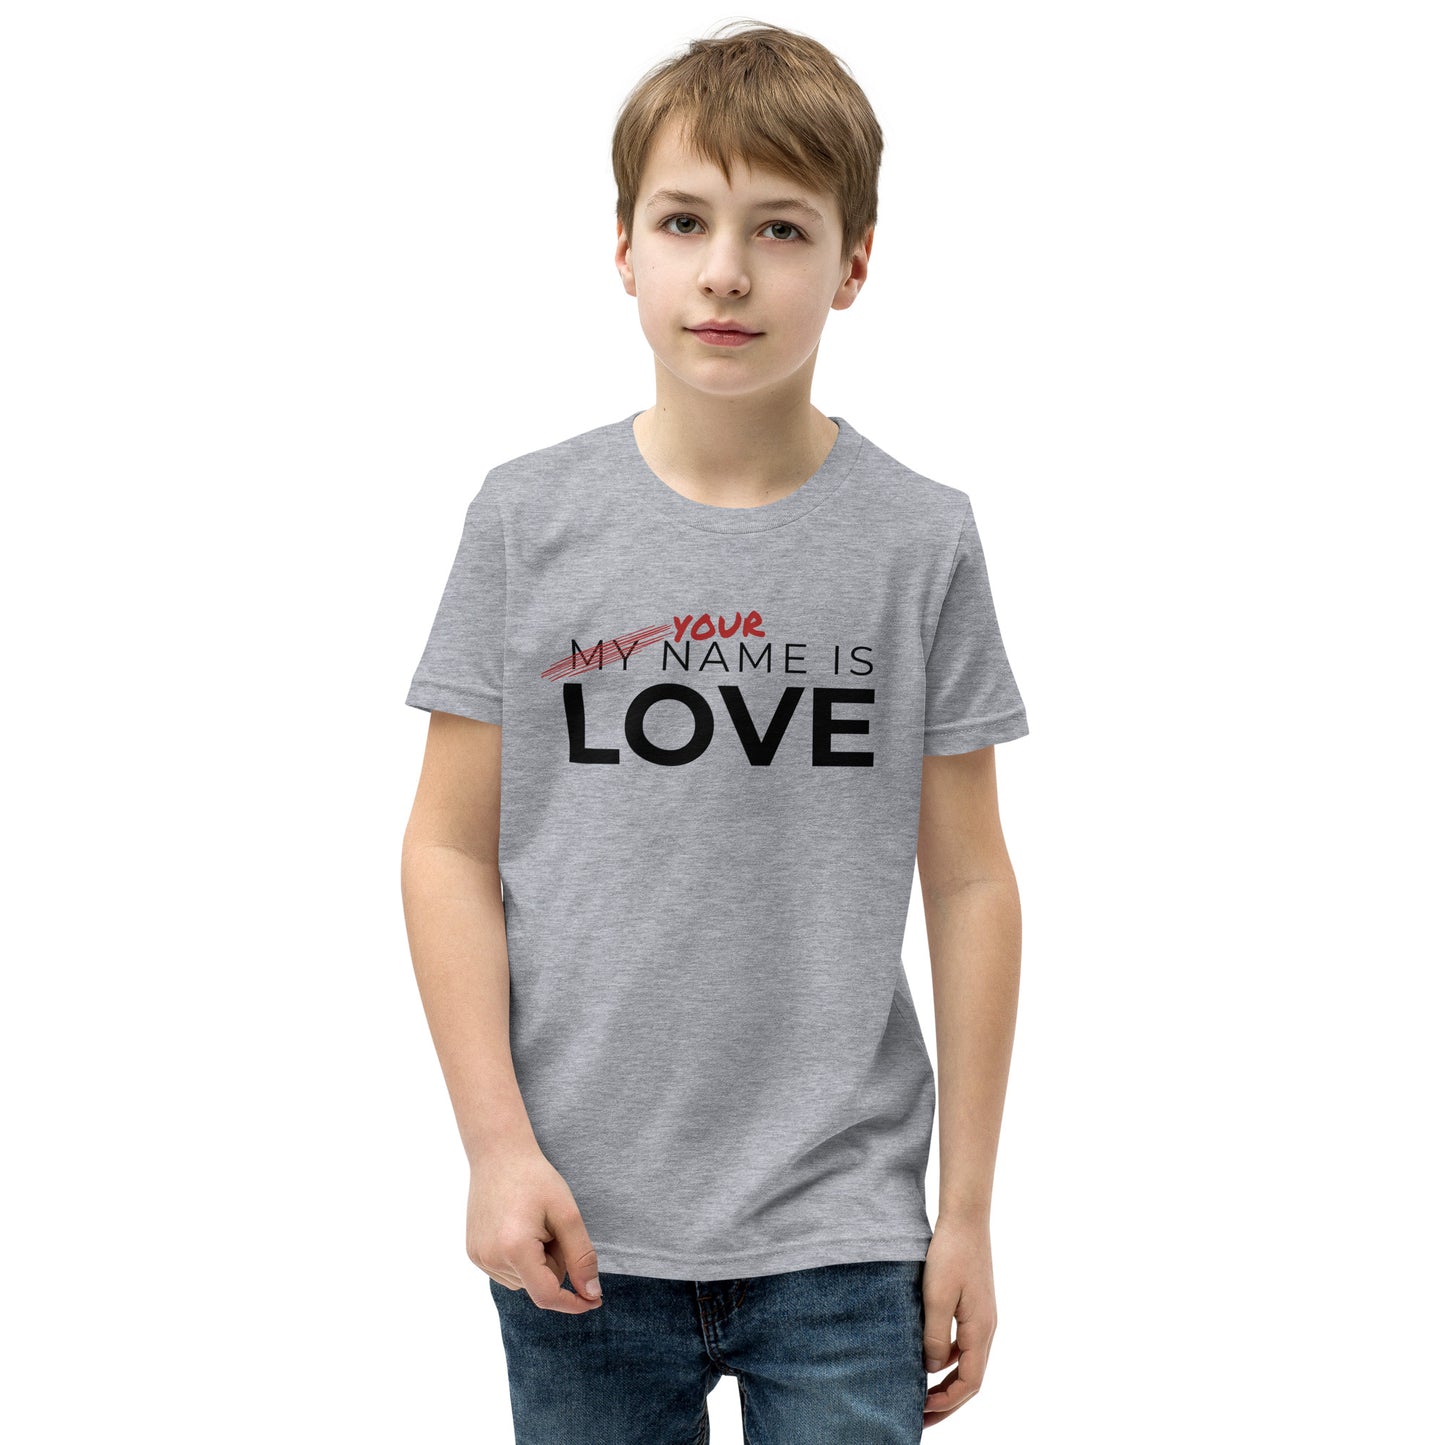 Your Name Is Love: Youth Short Sleeve T-Shirt